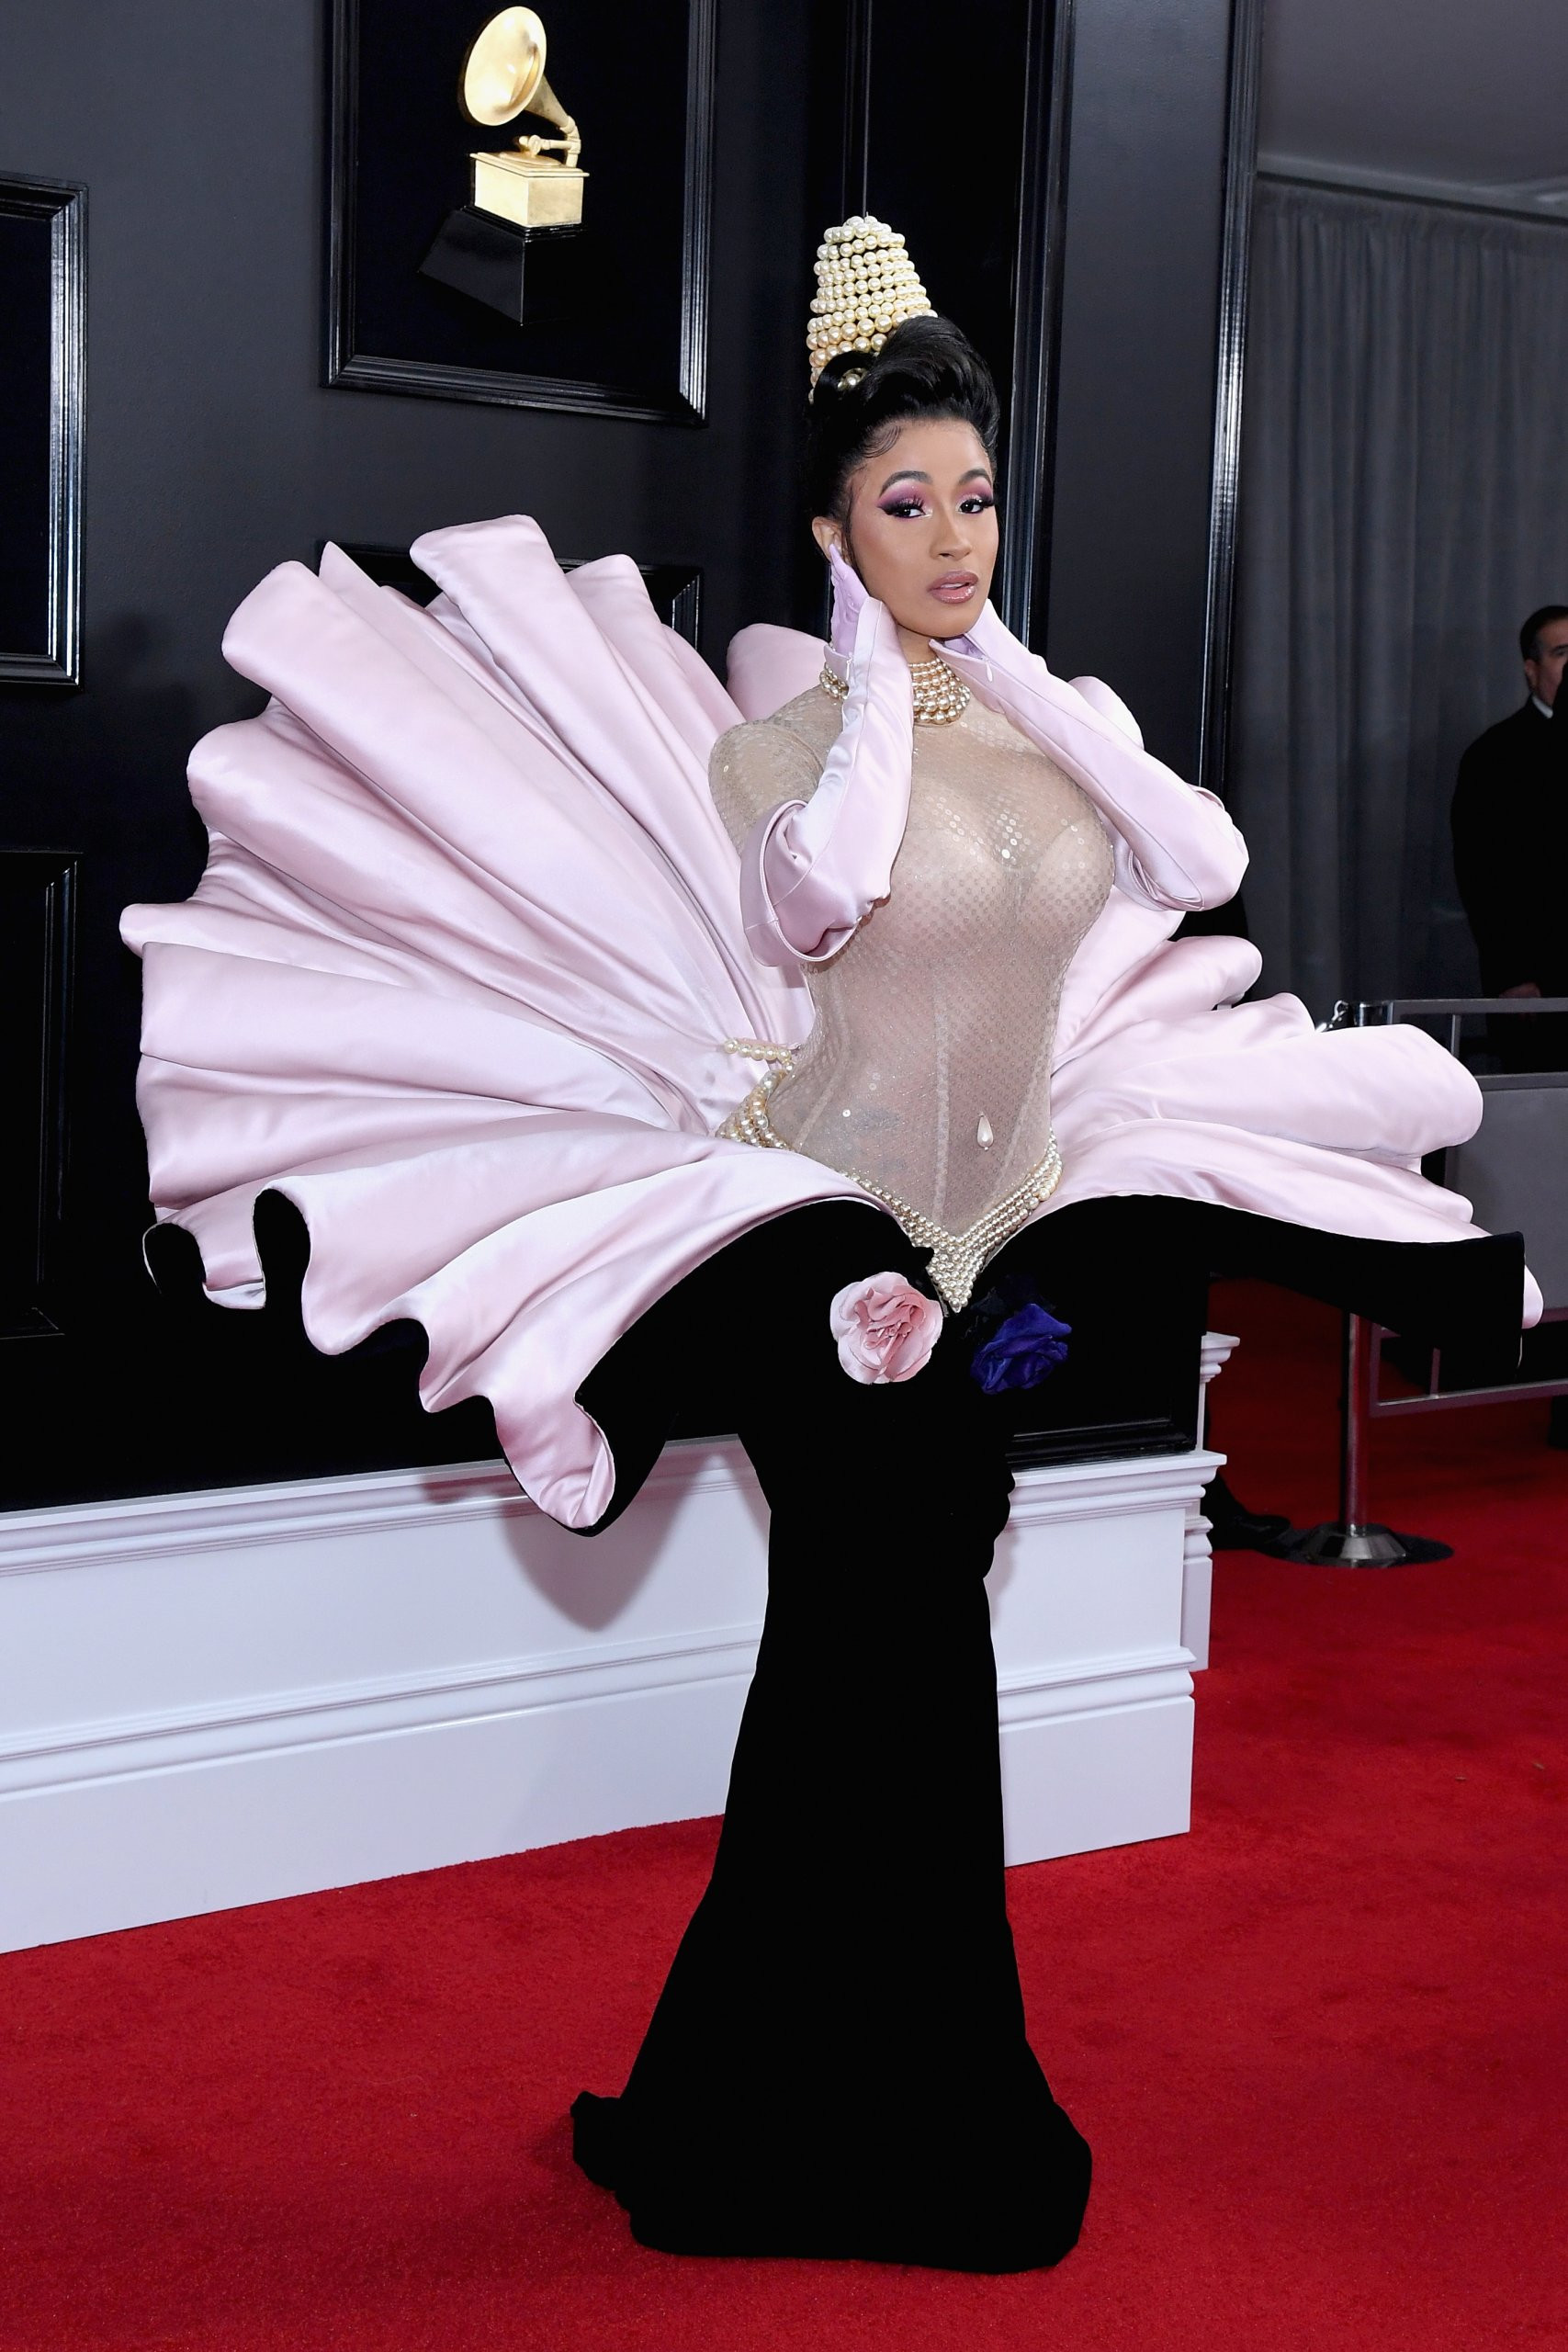 Cardi B turned up to the Grammys in a pearladorned dress that made her